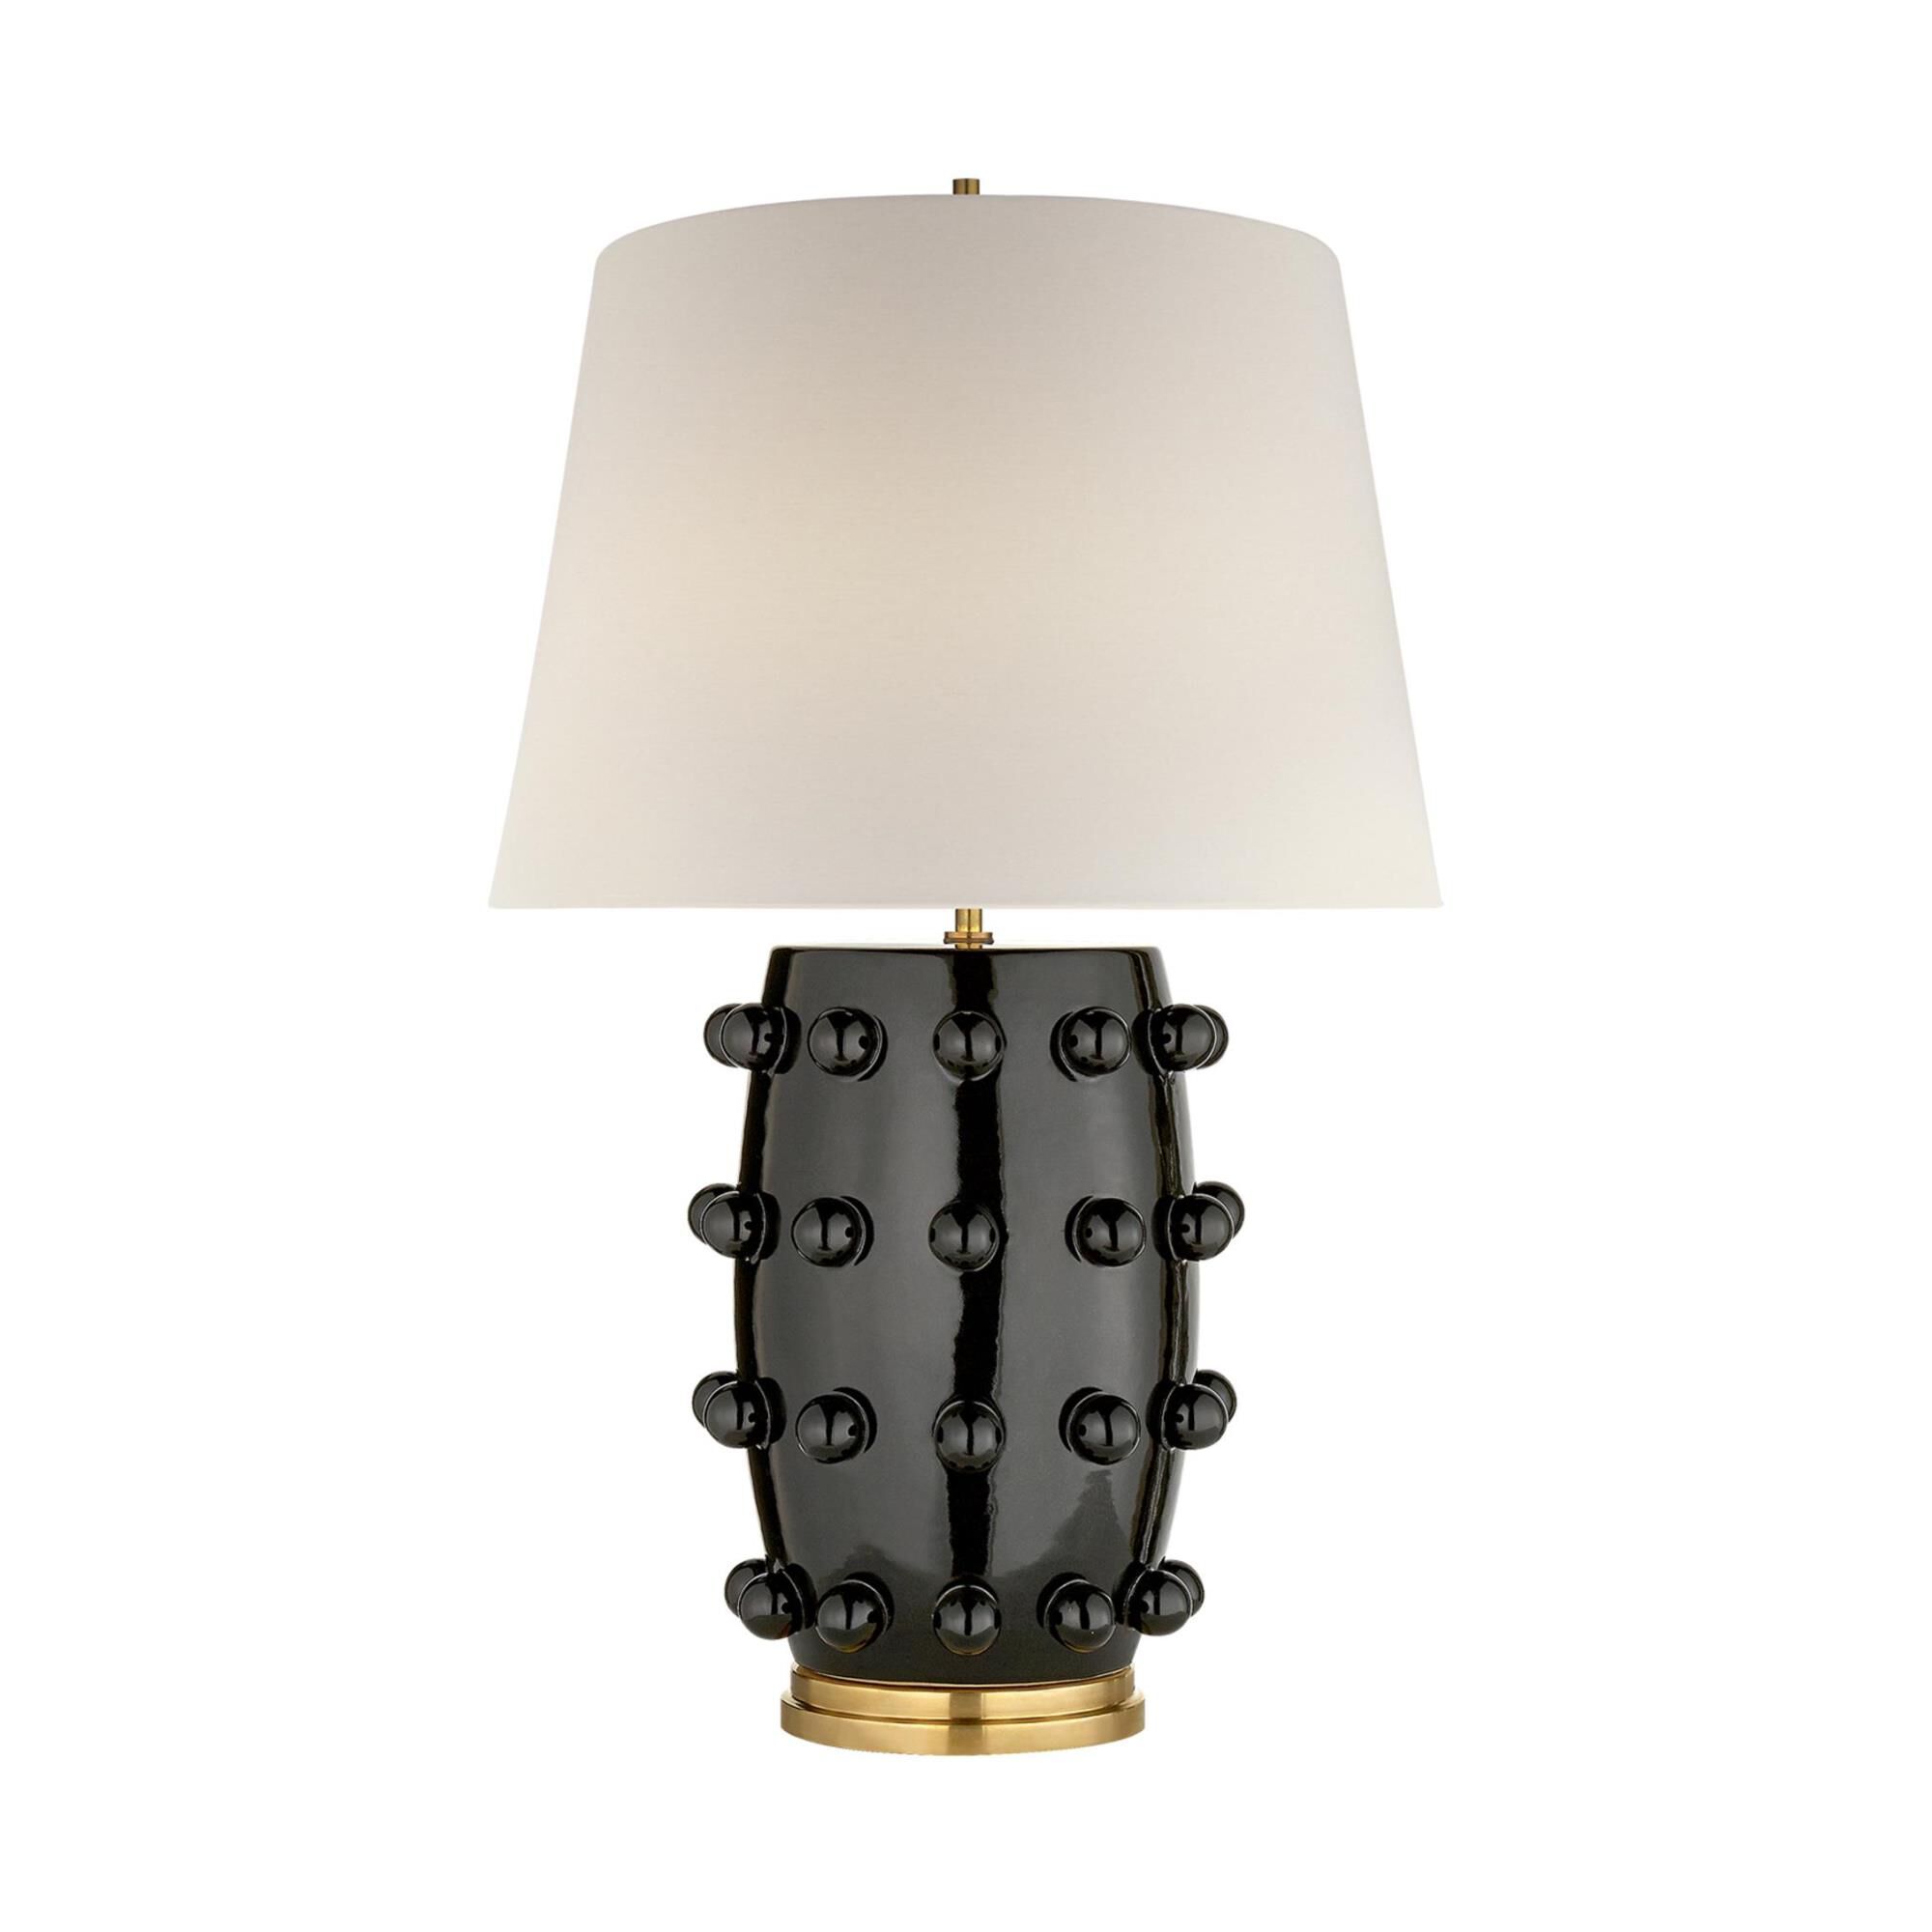 New


Kelly Wearstler Linden 26 Inch Table Lamp by Visual Comfort and Co.

Capitol ID: CP214043 | 1800 Lighting